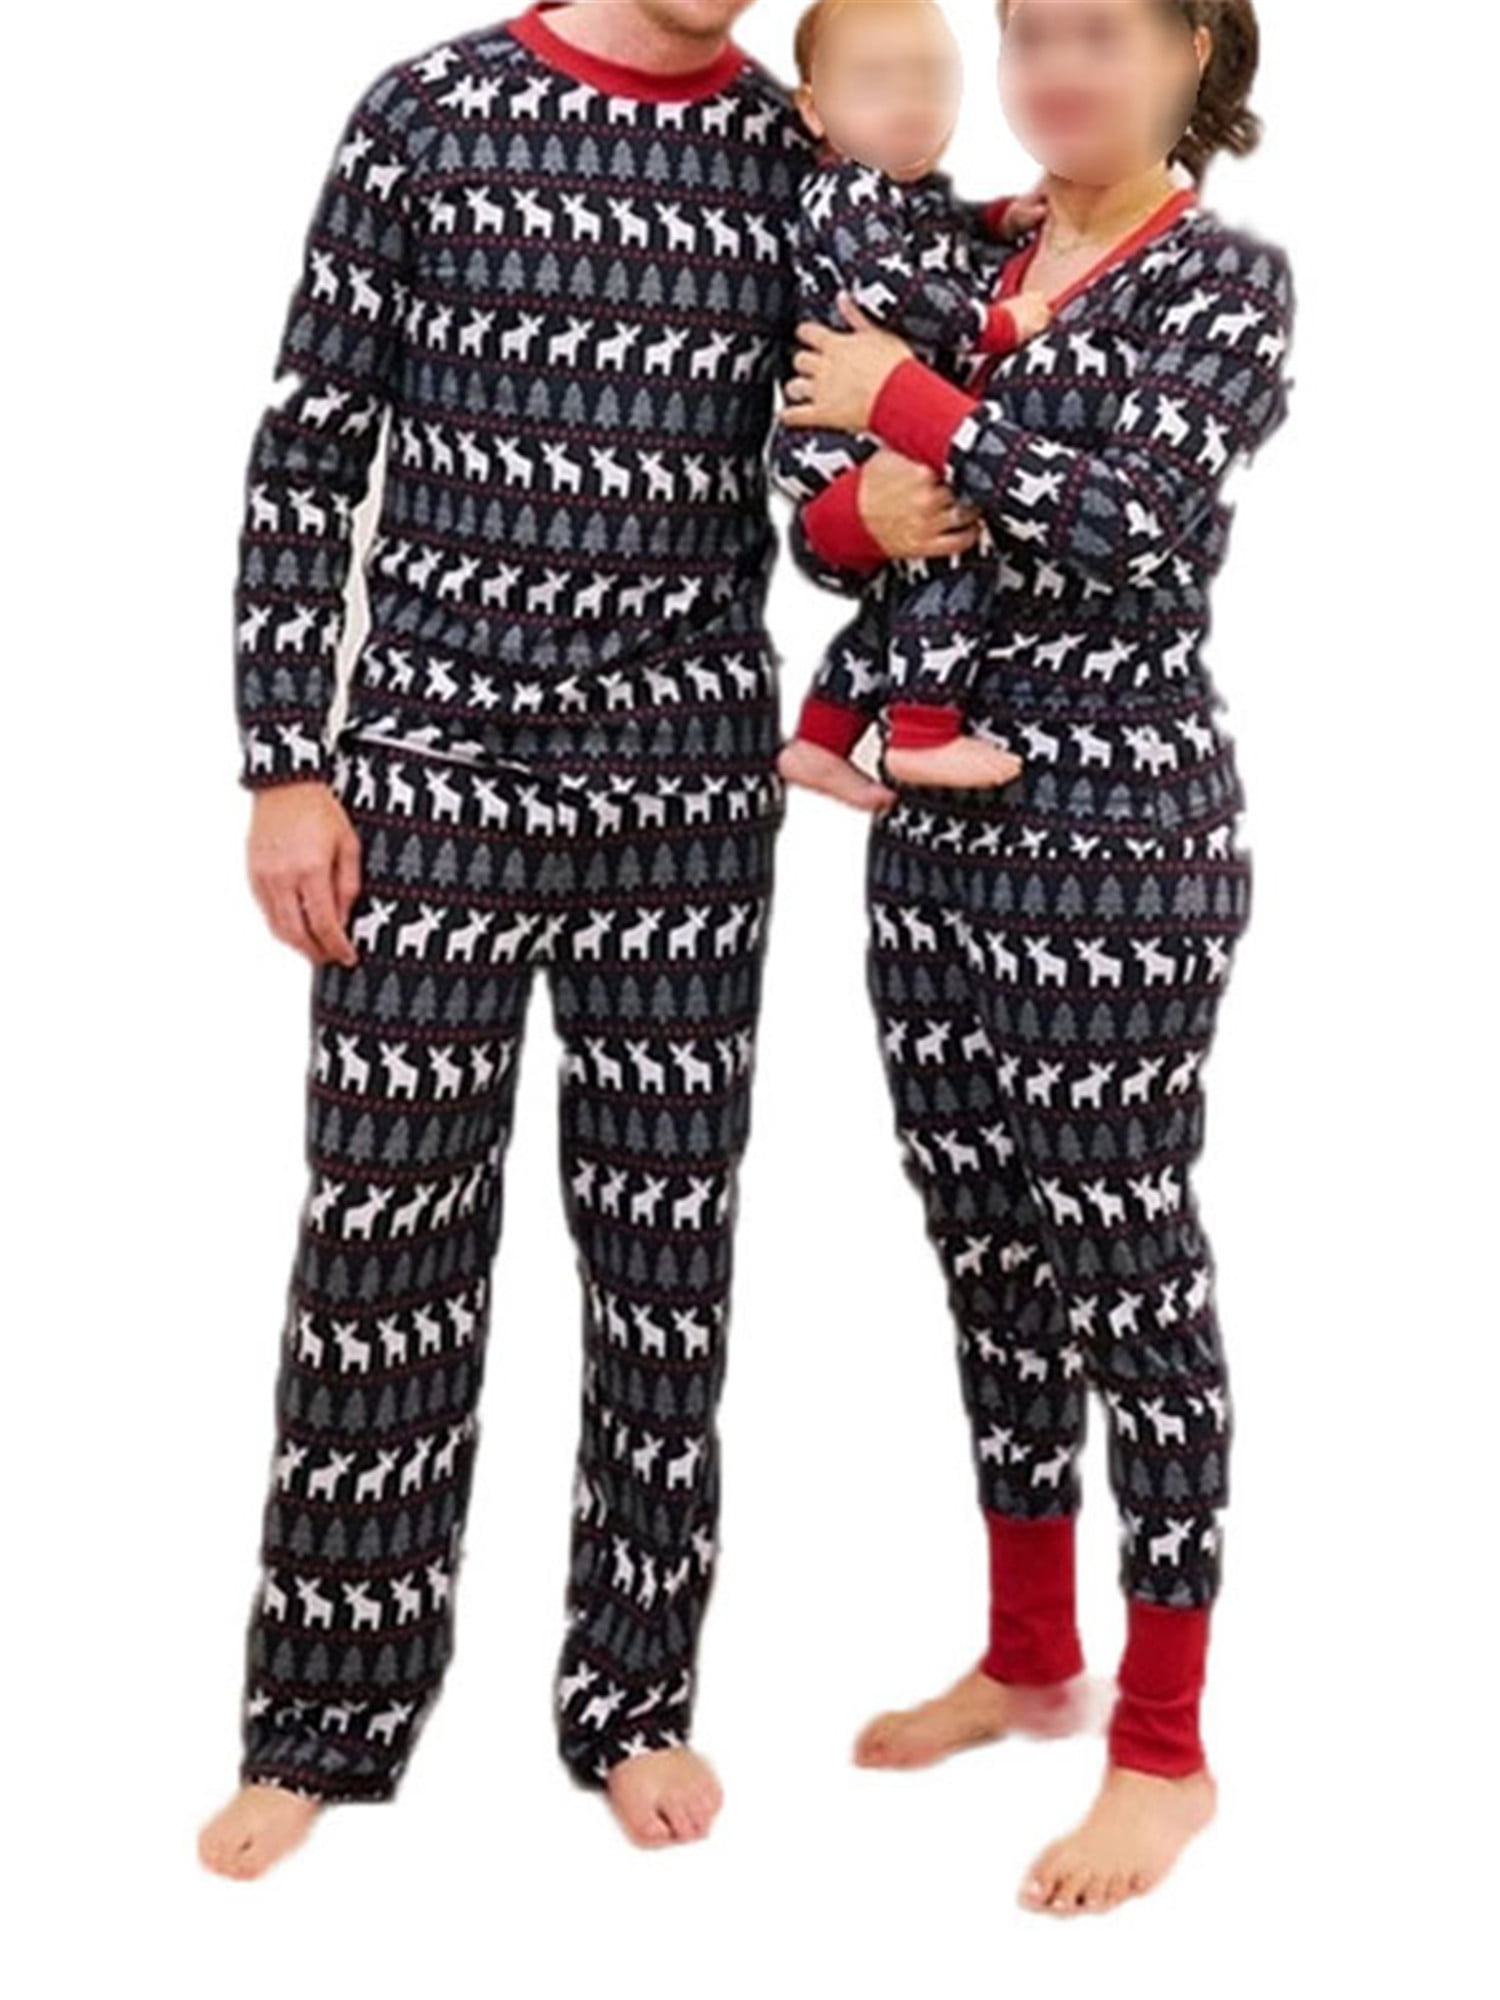 Little bety Family Matching Christmas Pajamas Holiday Sleepwear for Couple 